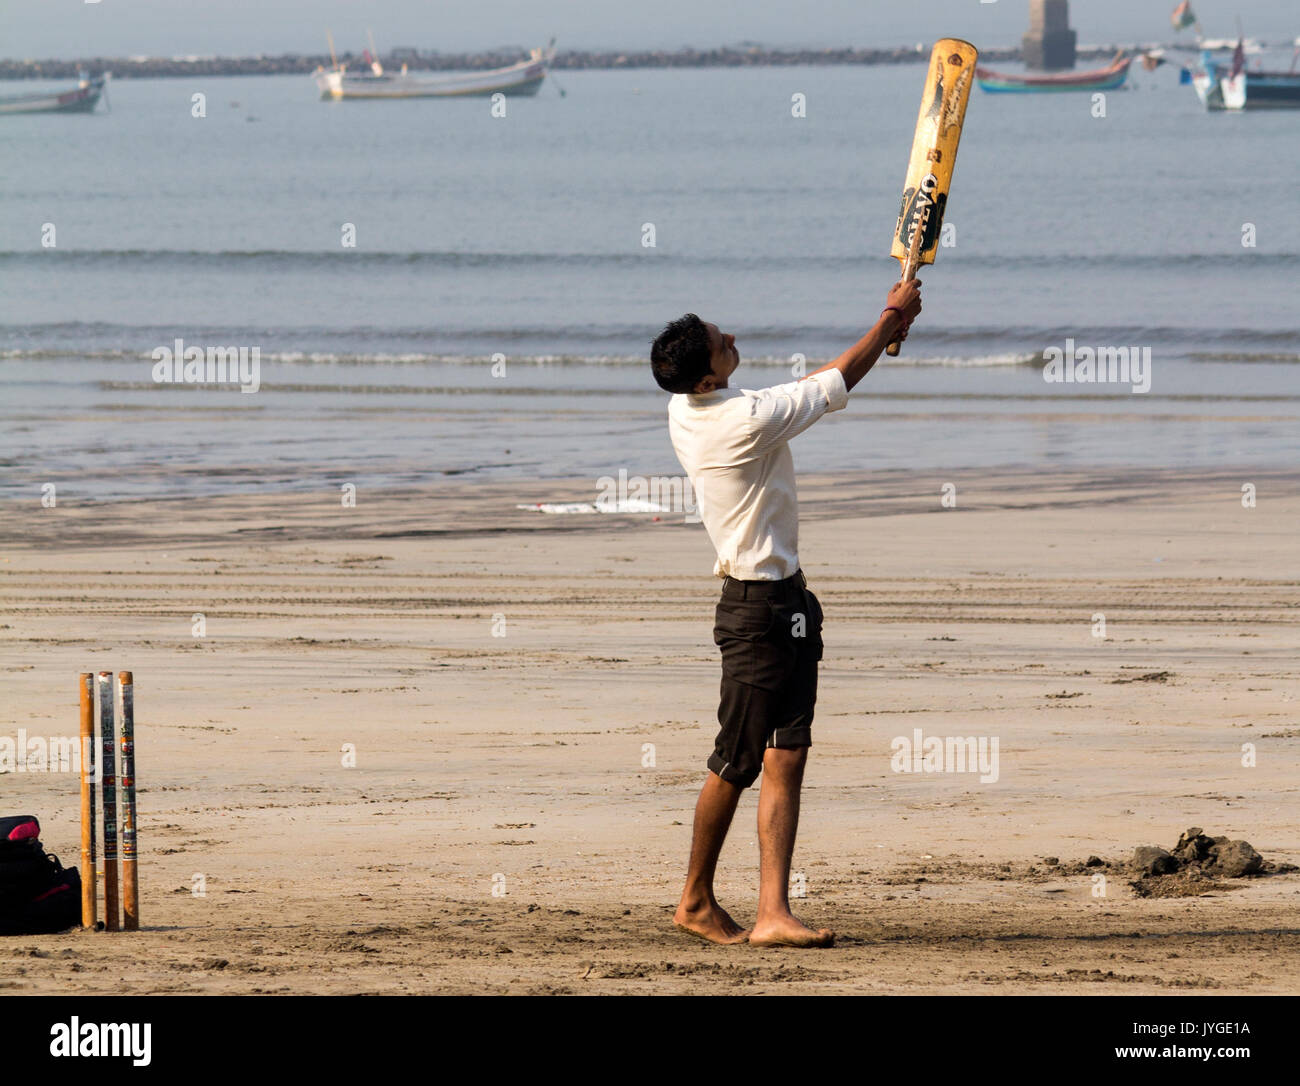 Boy playing cricket at the beach Stock Photo